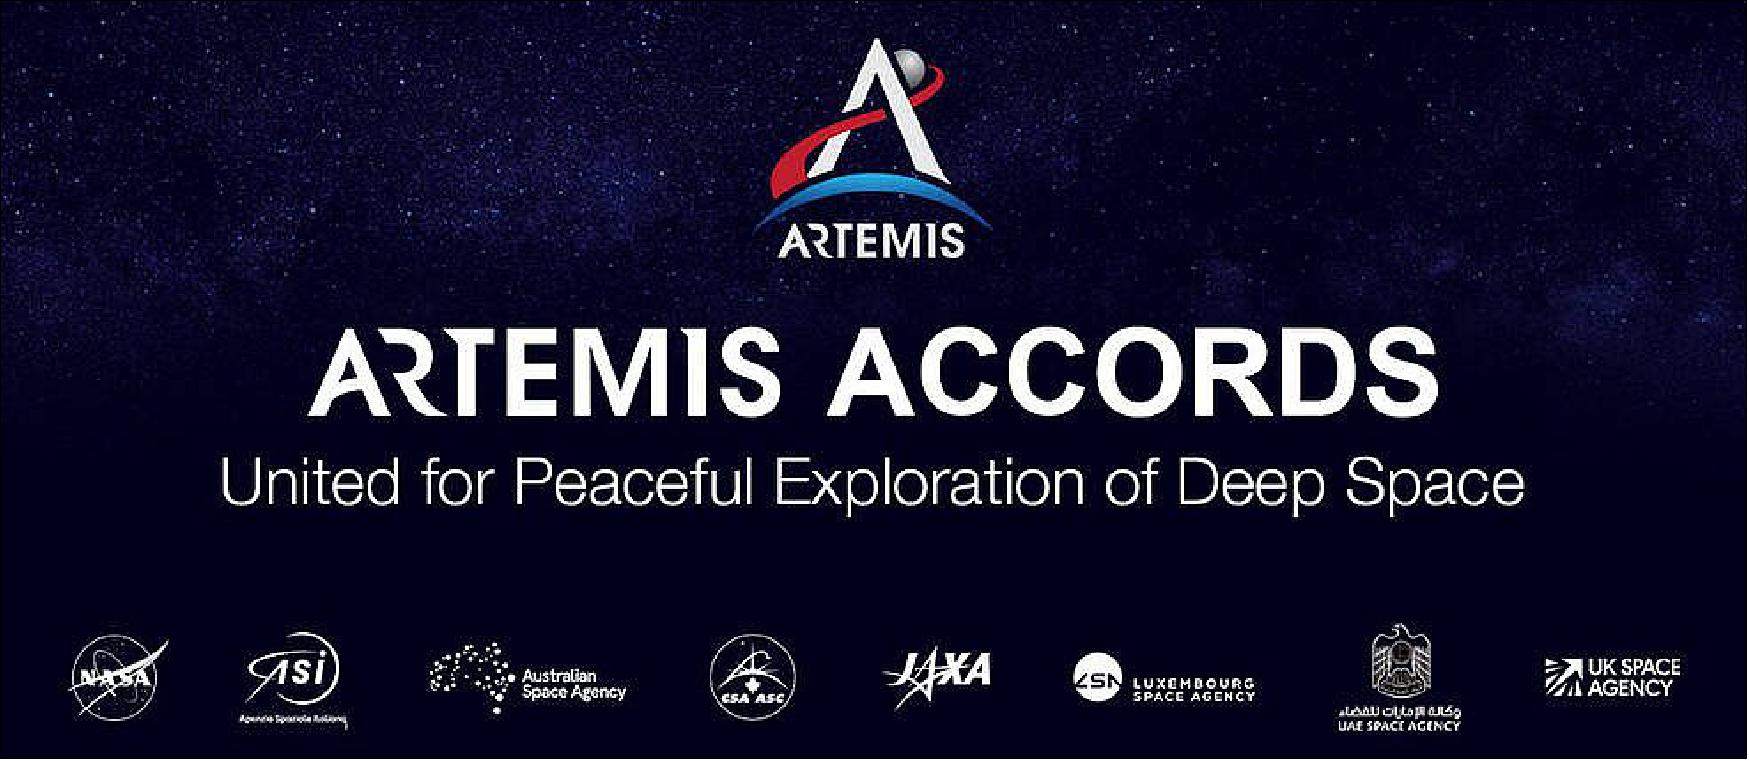 Figure 33: NASA, International Partners Advance Cooperation with First Signings of Artemis Accords (image credit: NASA)